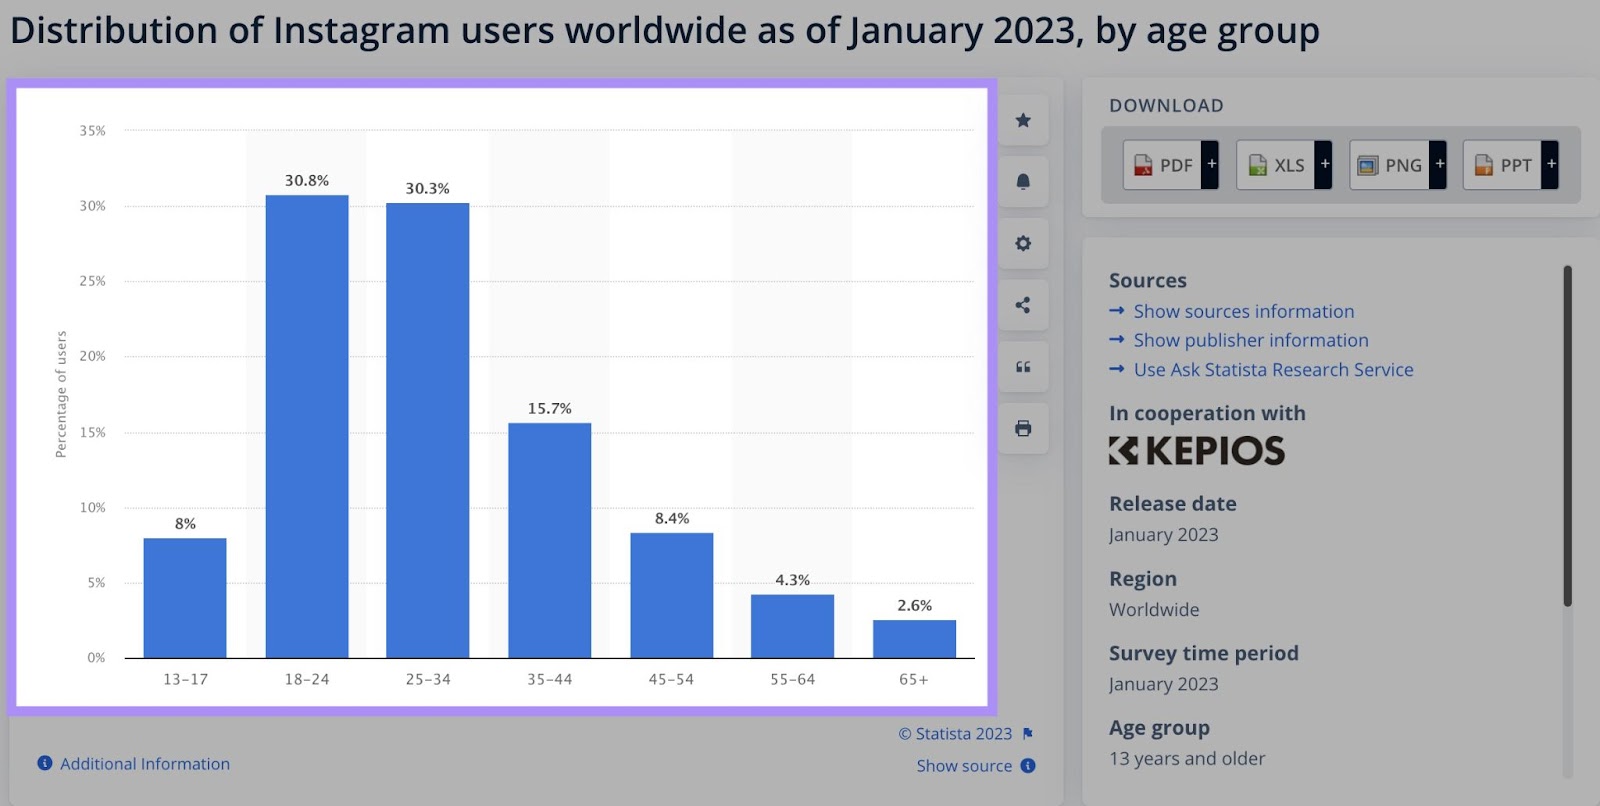 A chart showing distribution of Instagram users worldwide as of January 2023, by age group